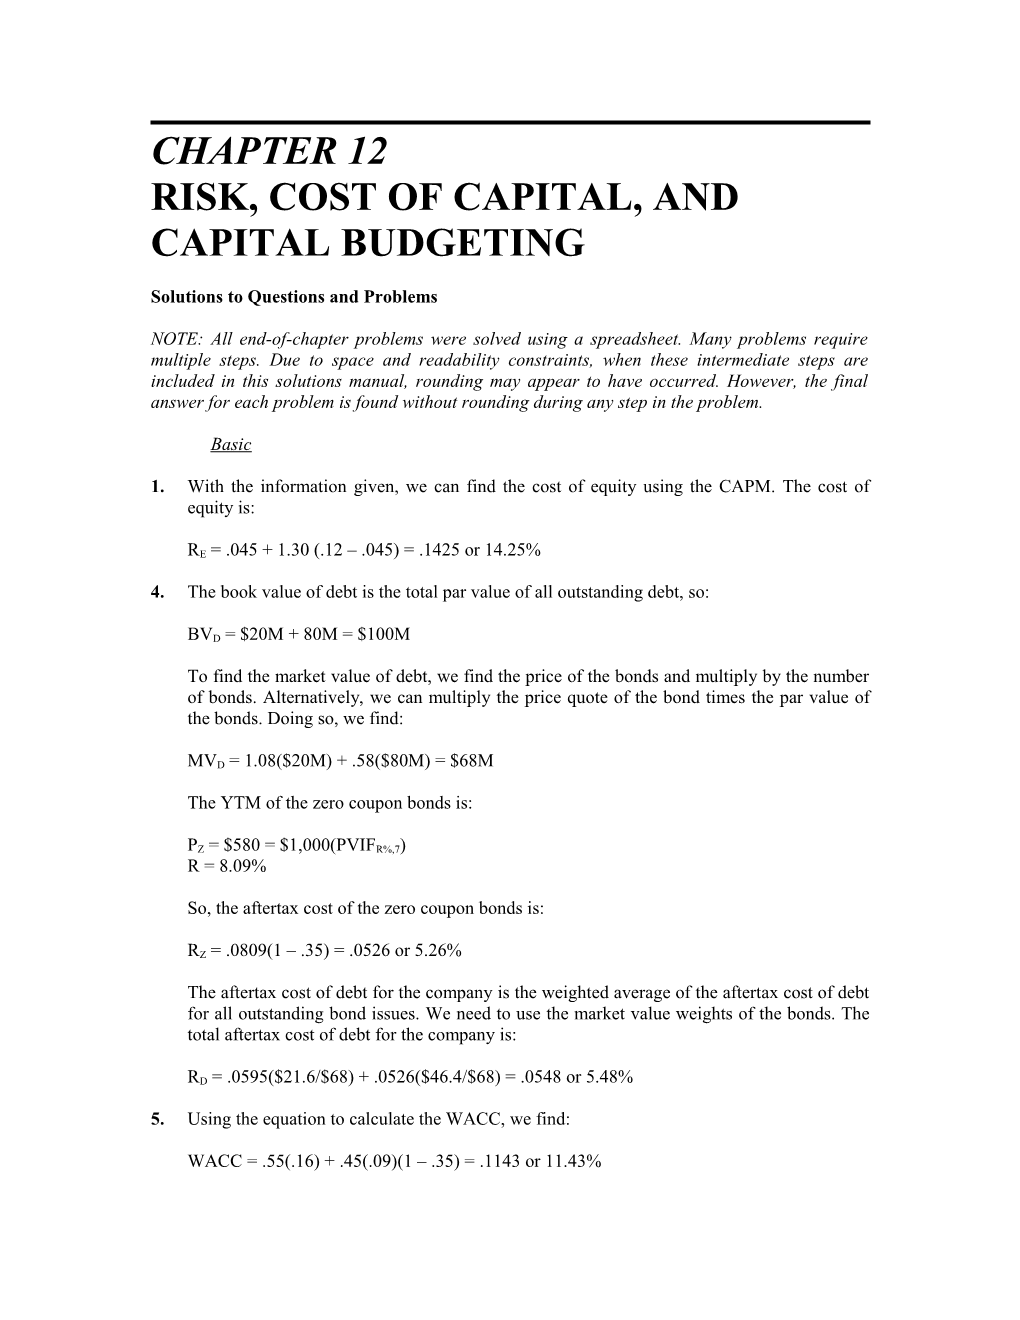 Risk, Cost of Capital, and Capital Budgeting